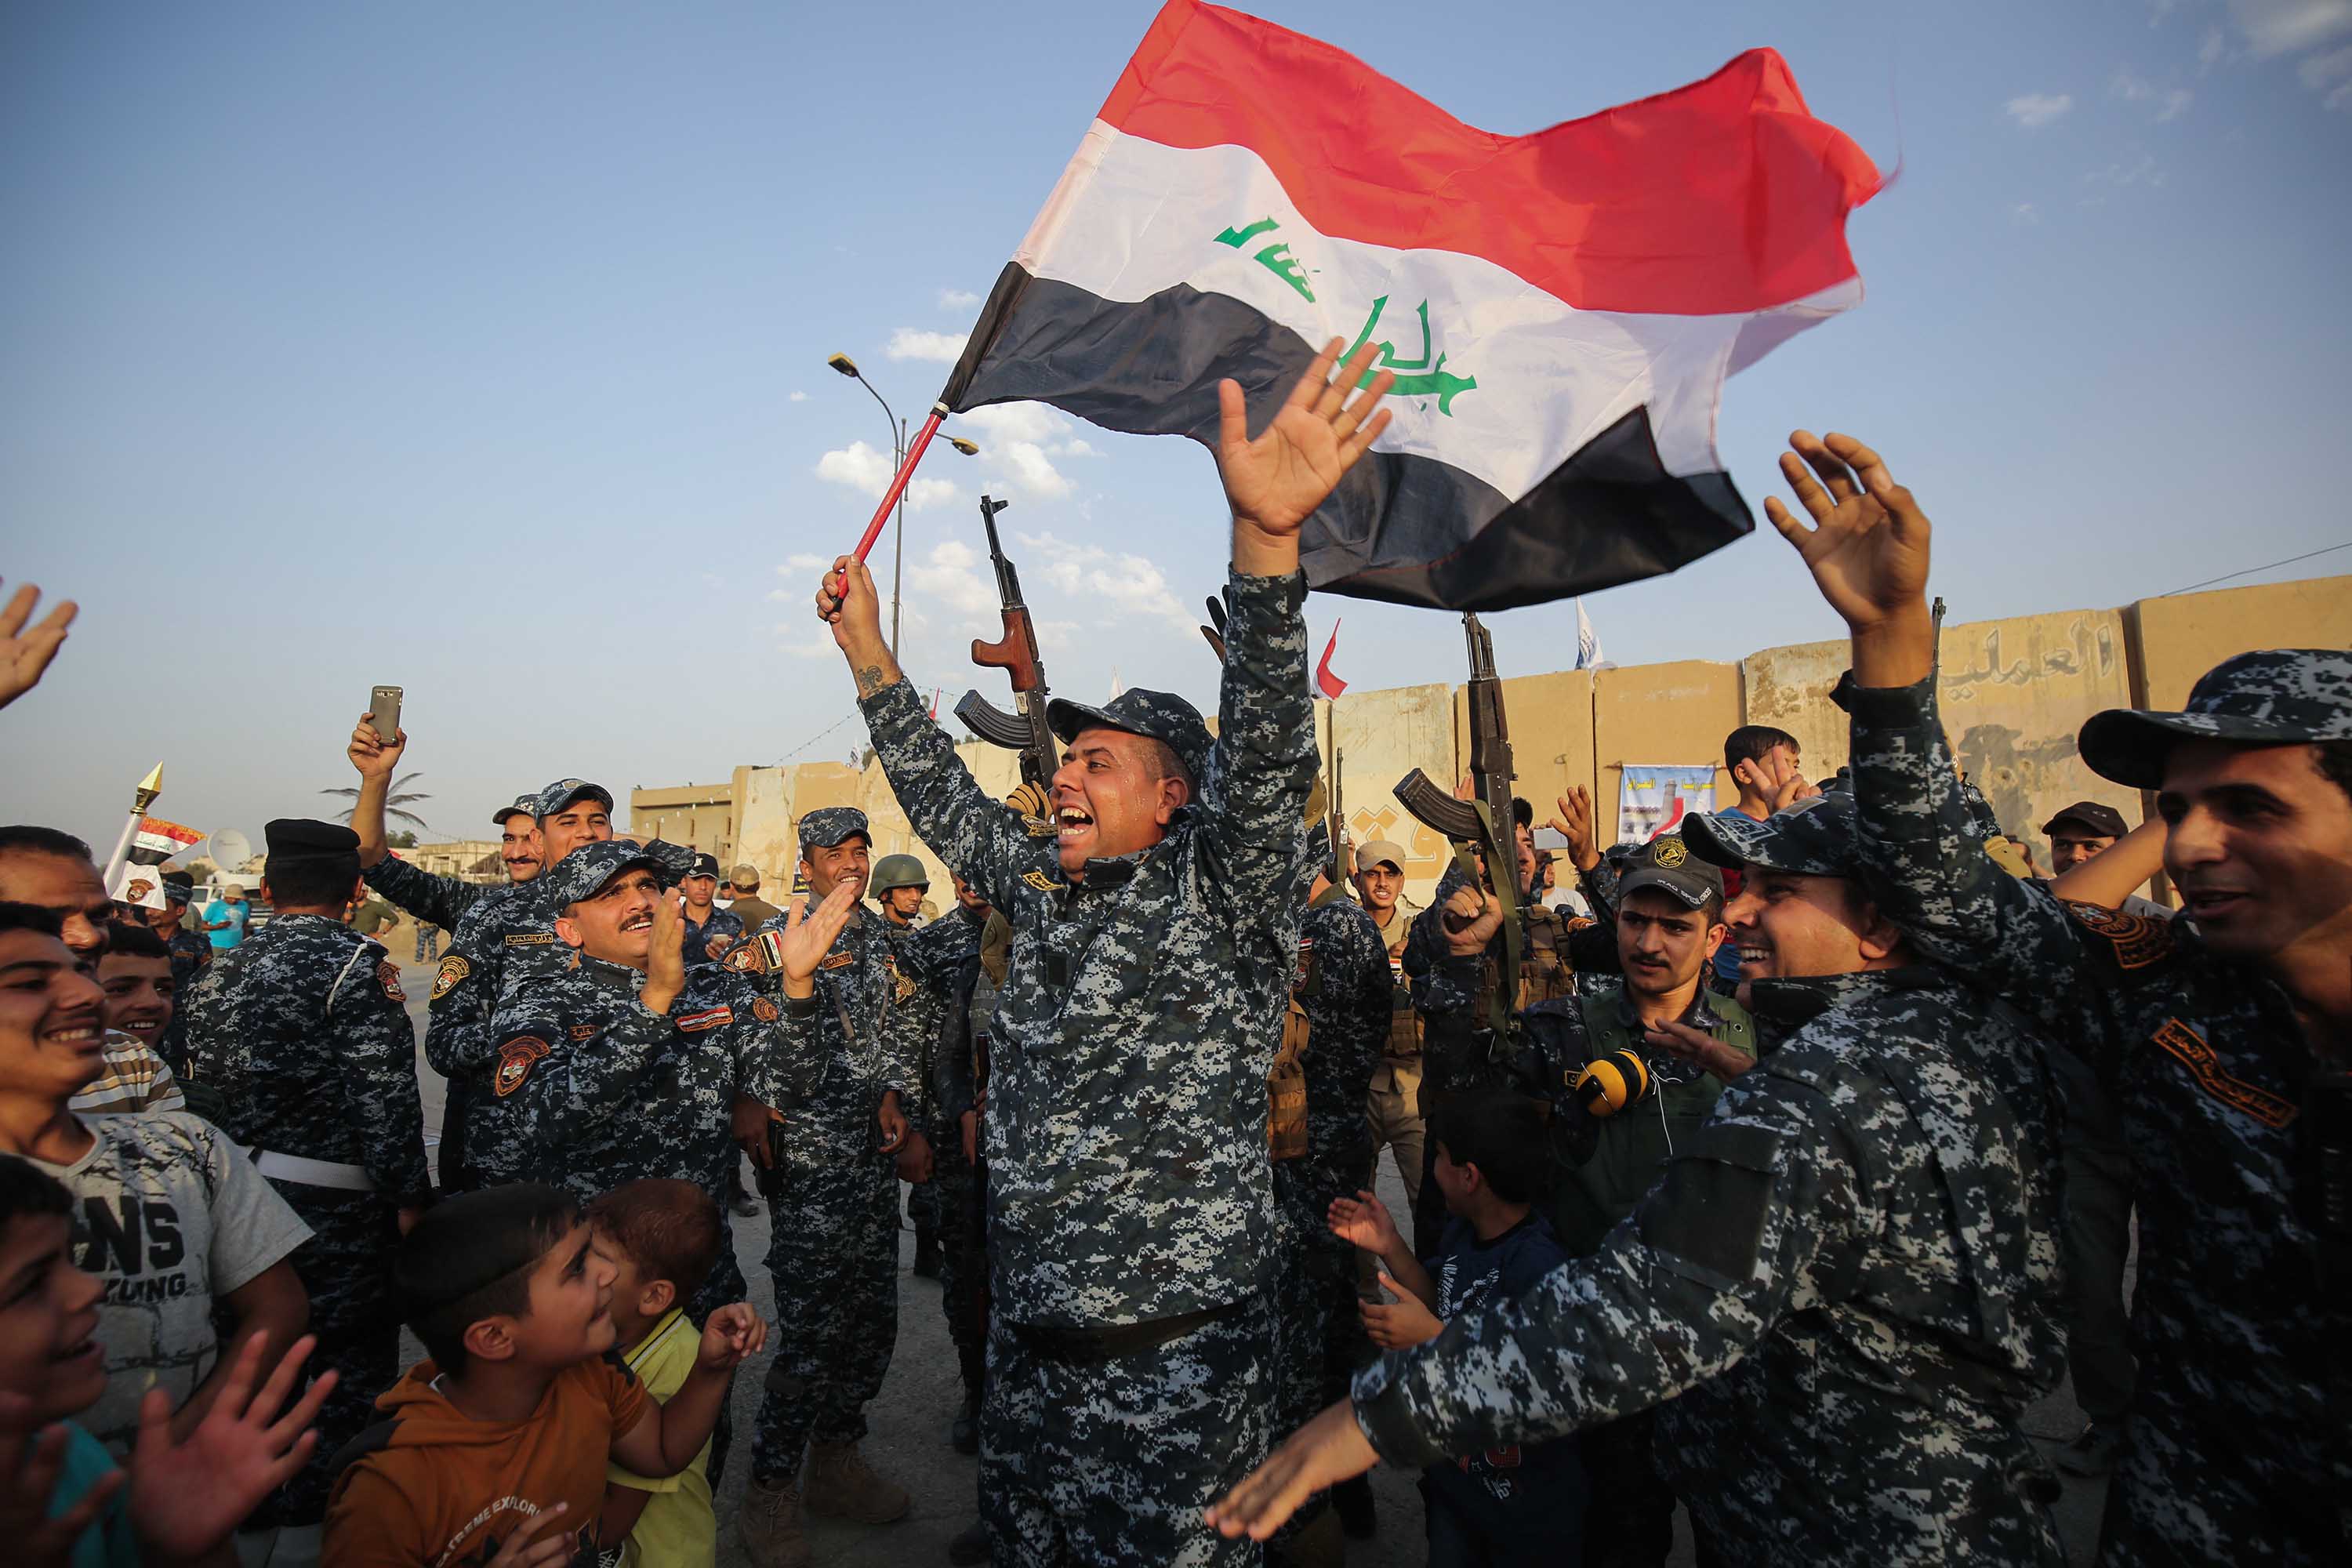 Iraqi prime minister arrives in Mosul to declare victory over ISIS, News